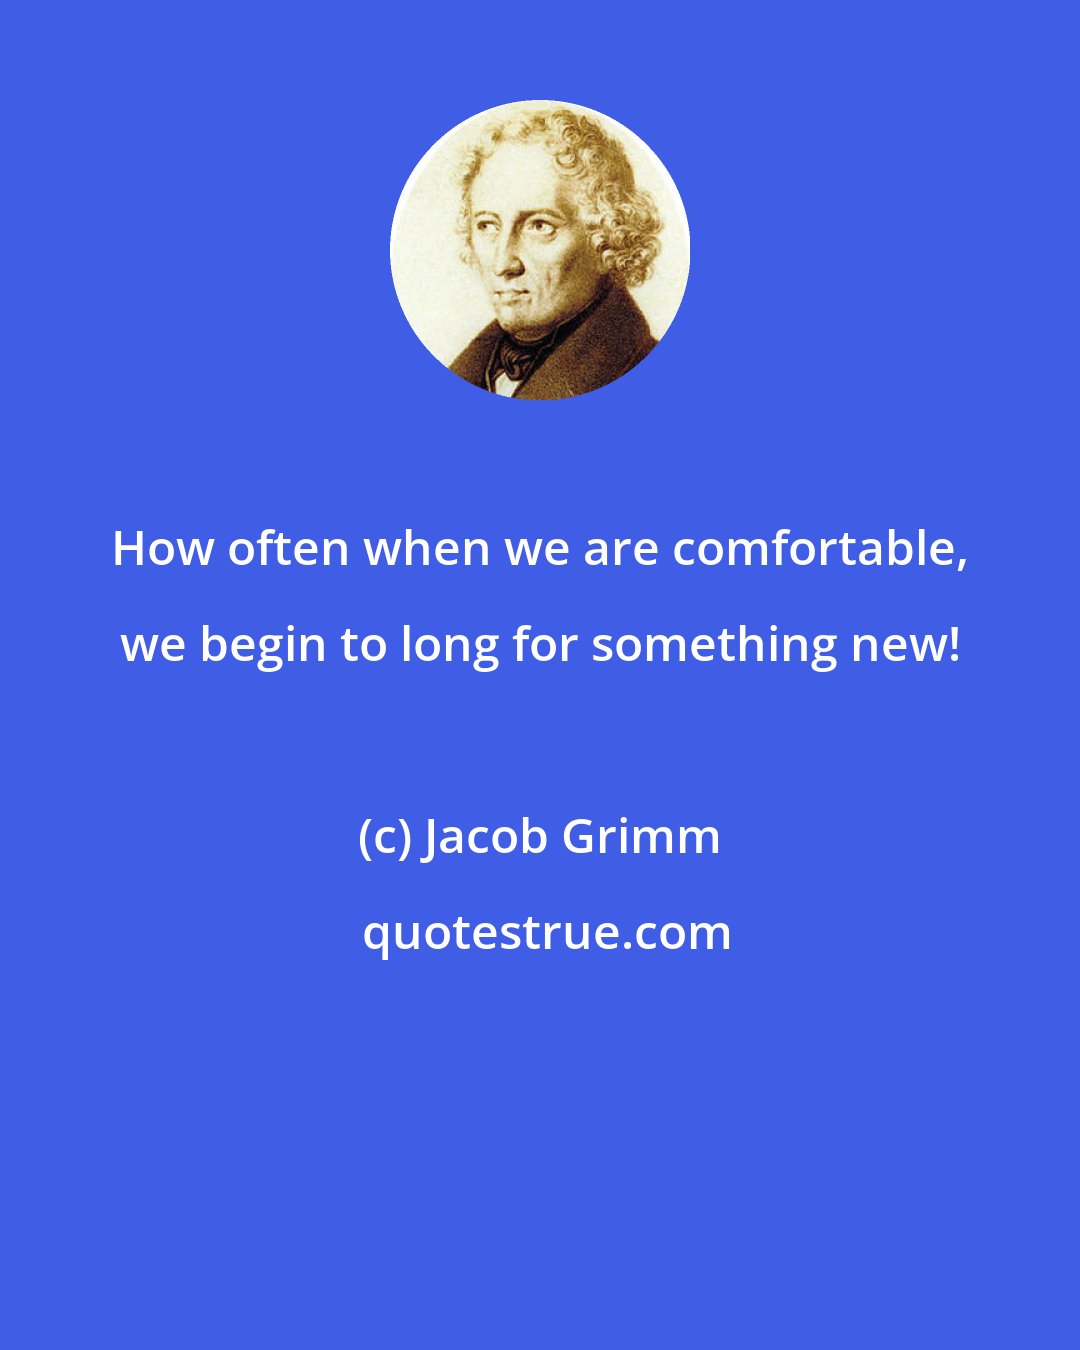 Jacob Grimm: How often when we are comfortable, we begin to long for something new!